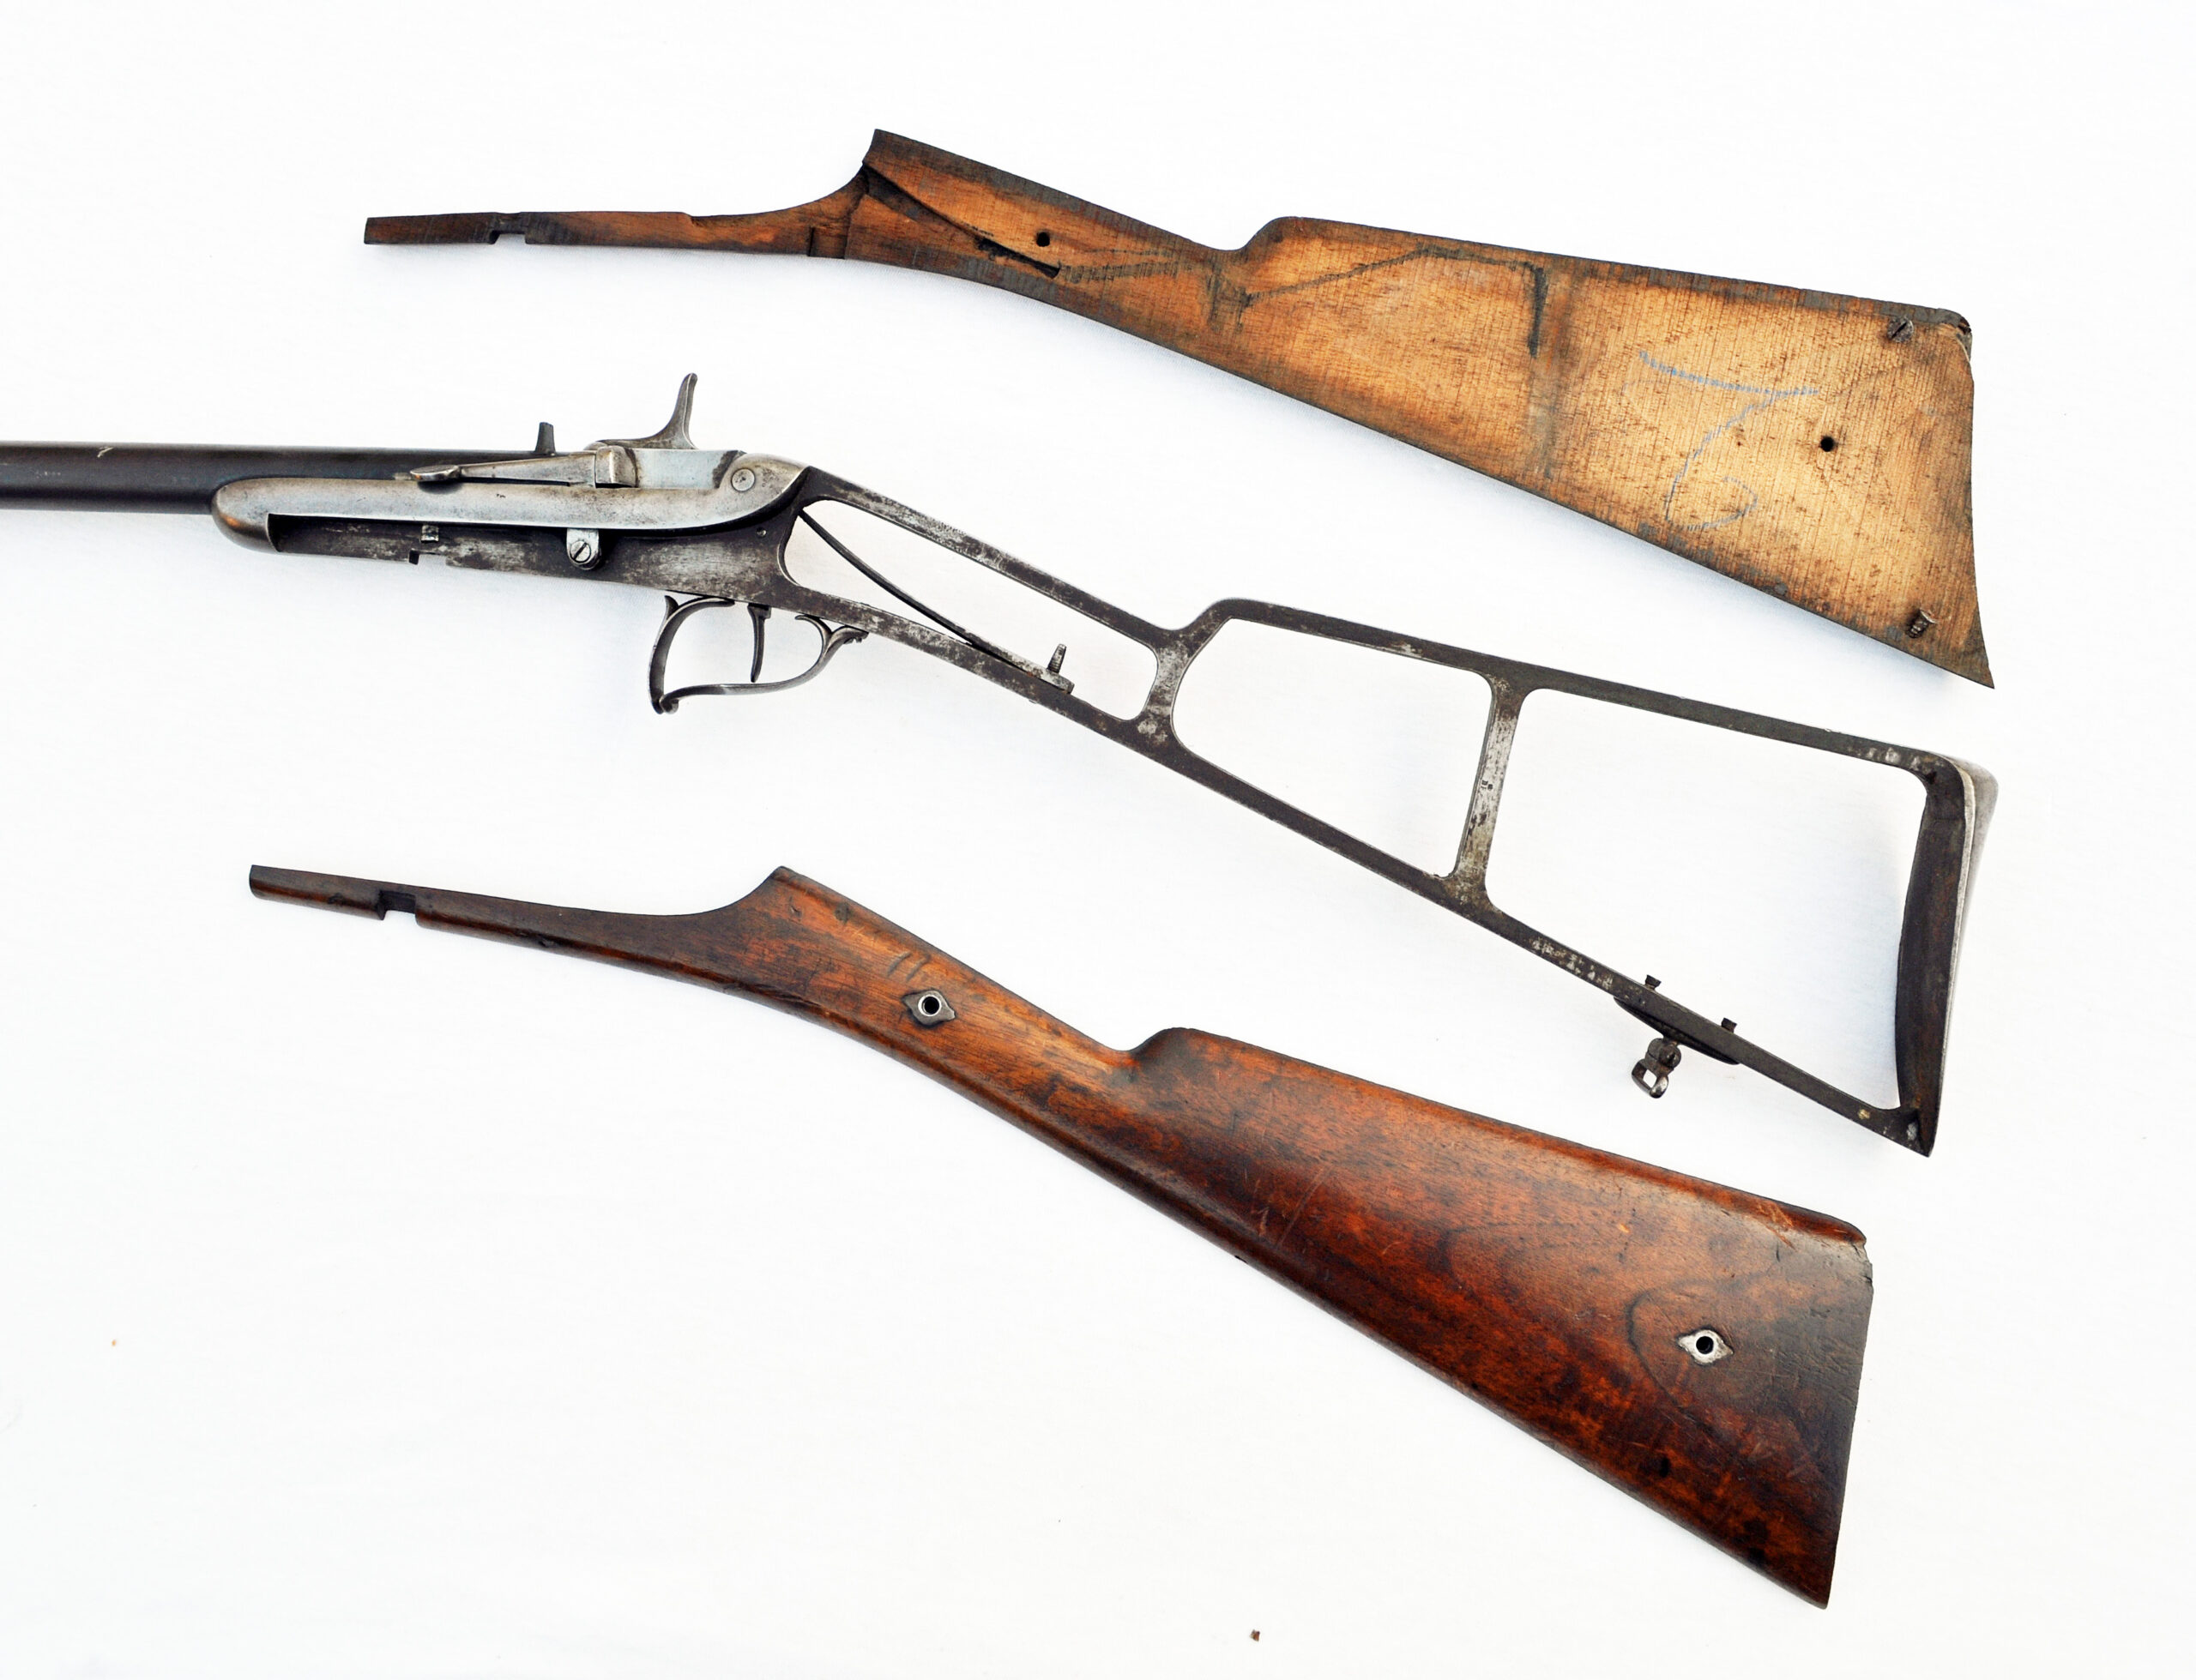 Carbine with metal frame according to the 1859 patent